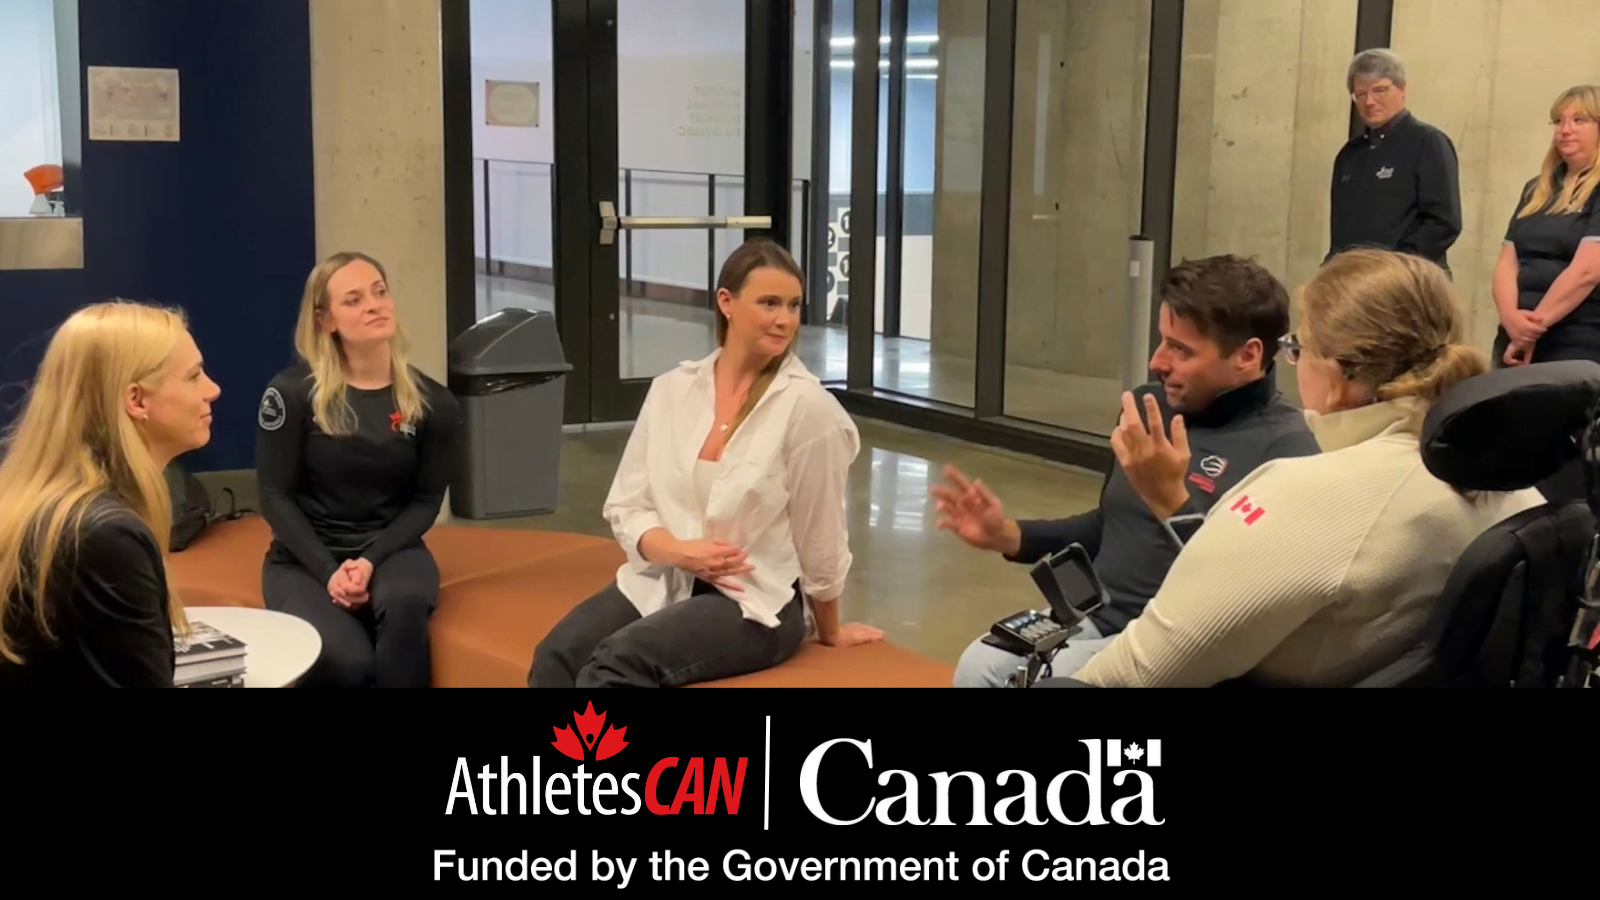 Minister of Sport Pascale St-Onge and AthletesCAN President Erin Willson speak with national team athletes. Below: AthletesCAN and Canada logos with "Funded by Government of Canada" acknowledgement underneath